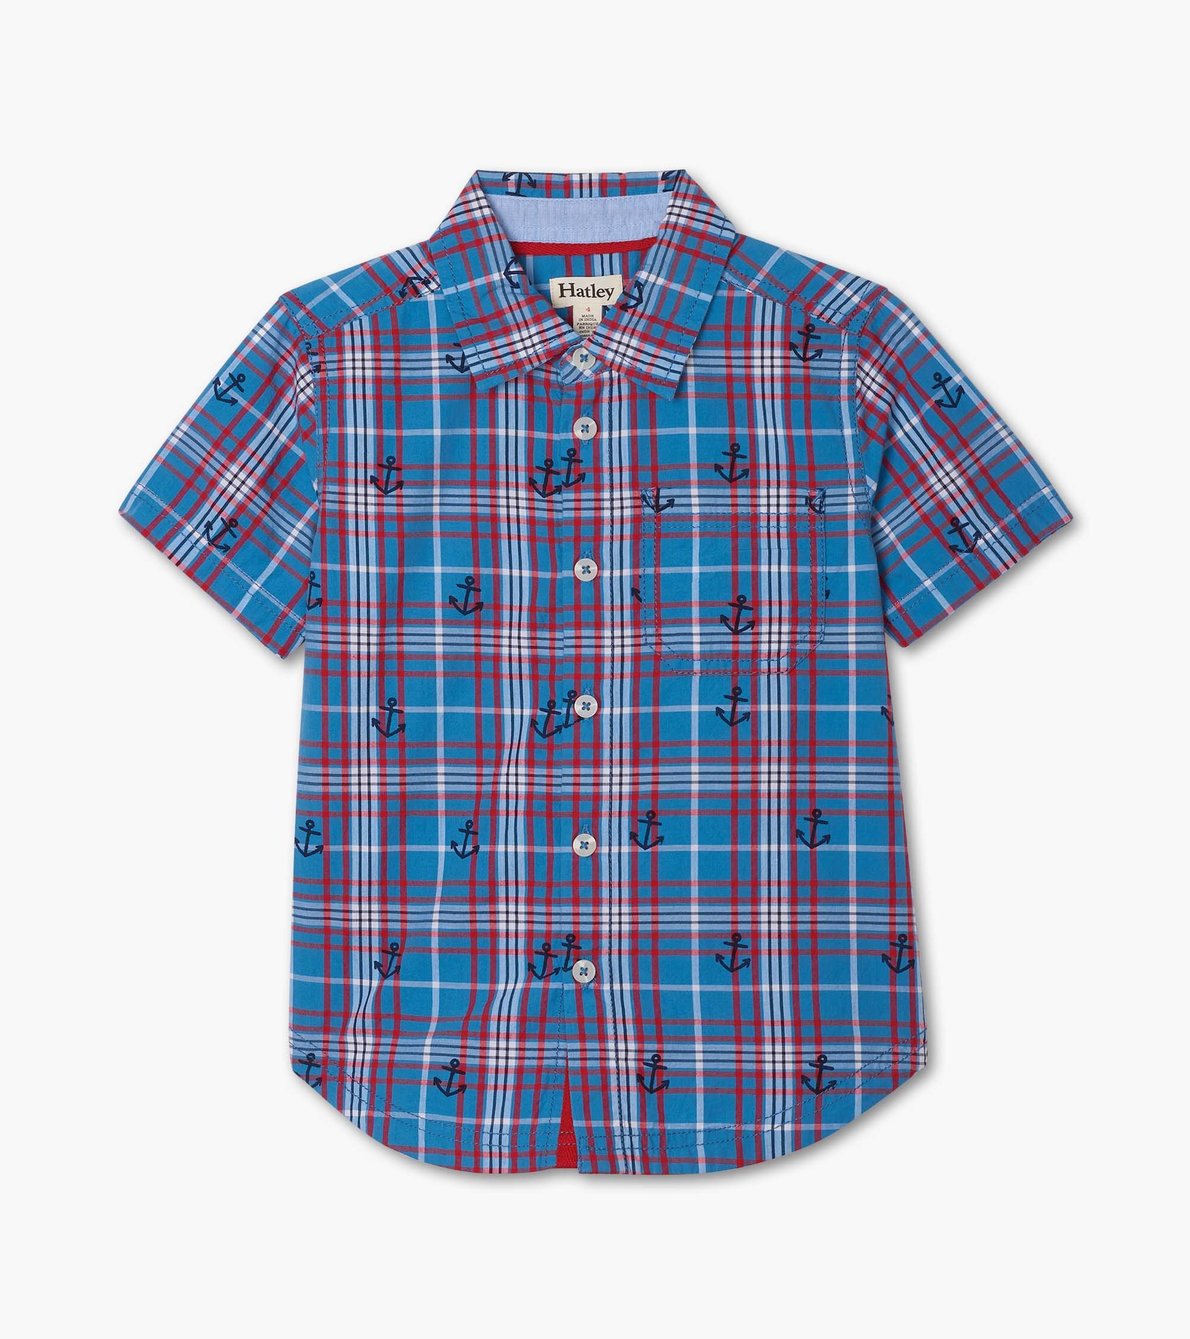 View larger image of Blue Plaid Short Sleeve Button Down Shirt